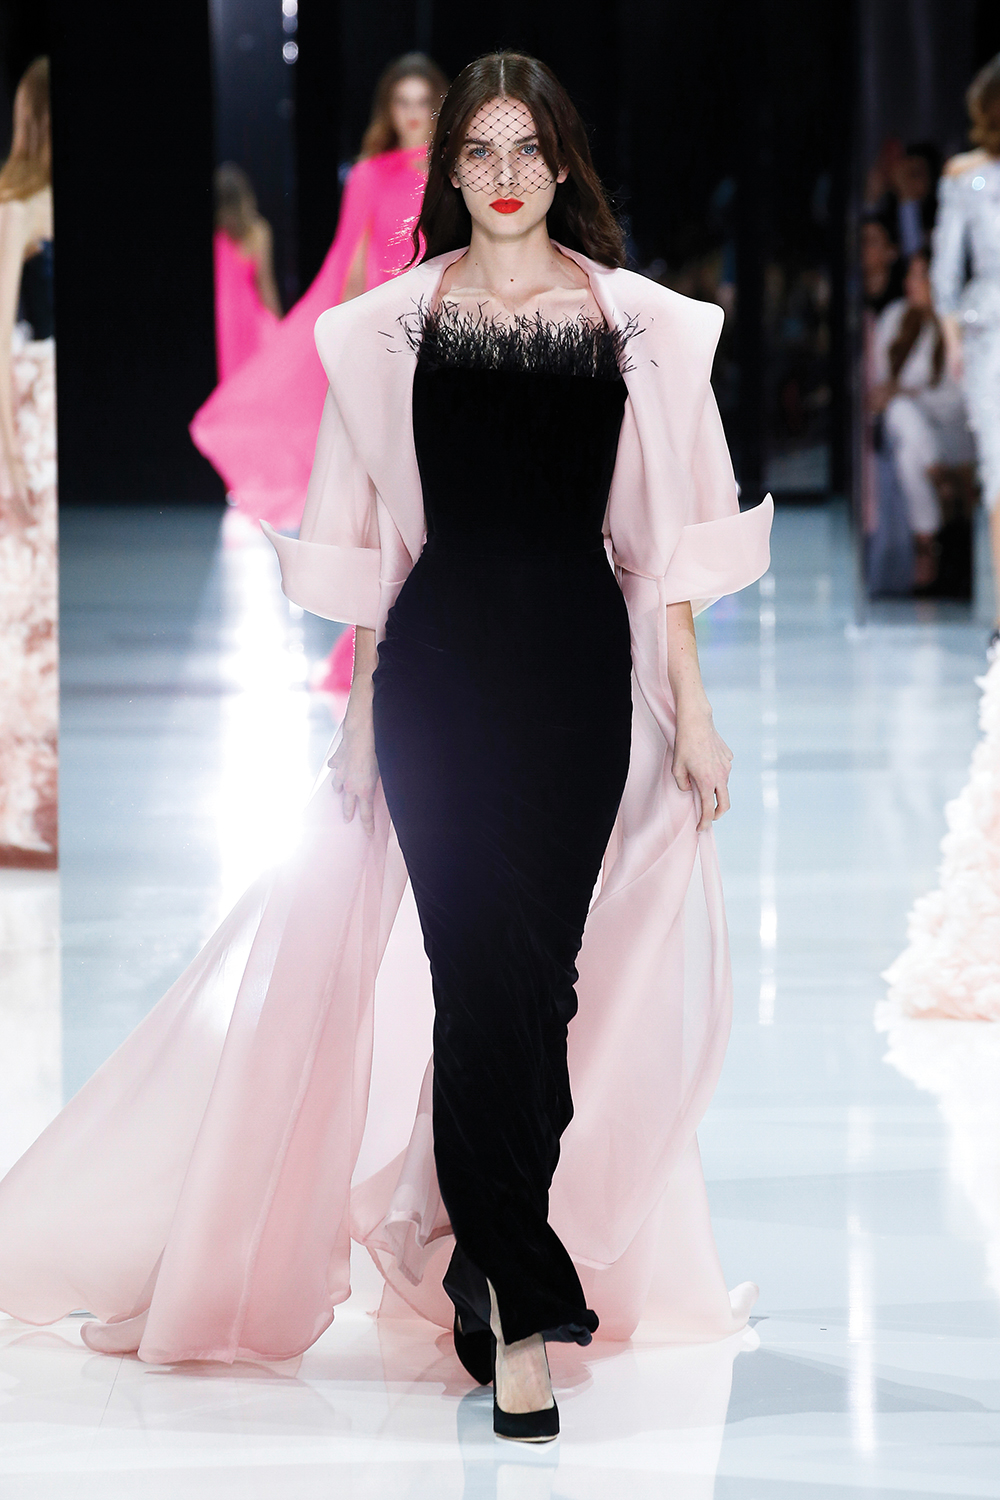 Ralph & Russo Spring/Summer 2018 Couture Show at The Grand Palais in Paris